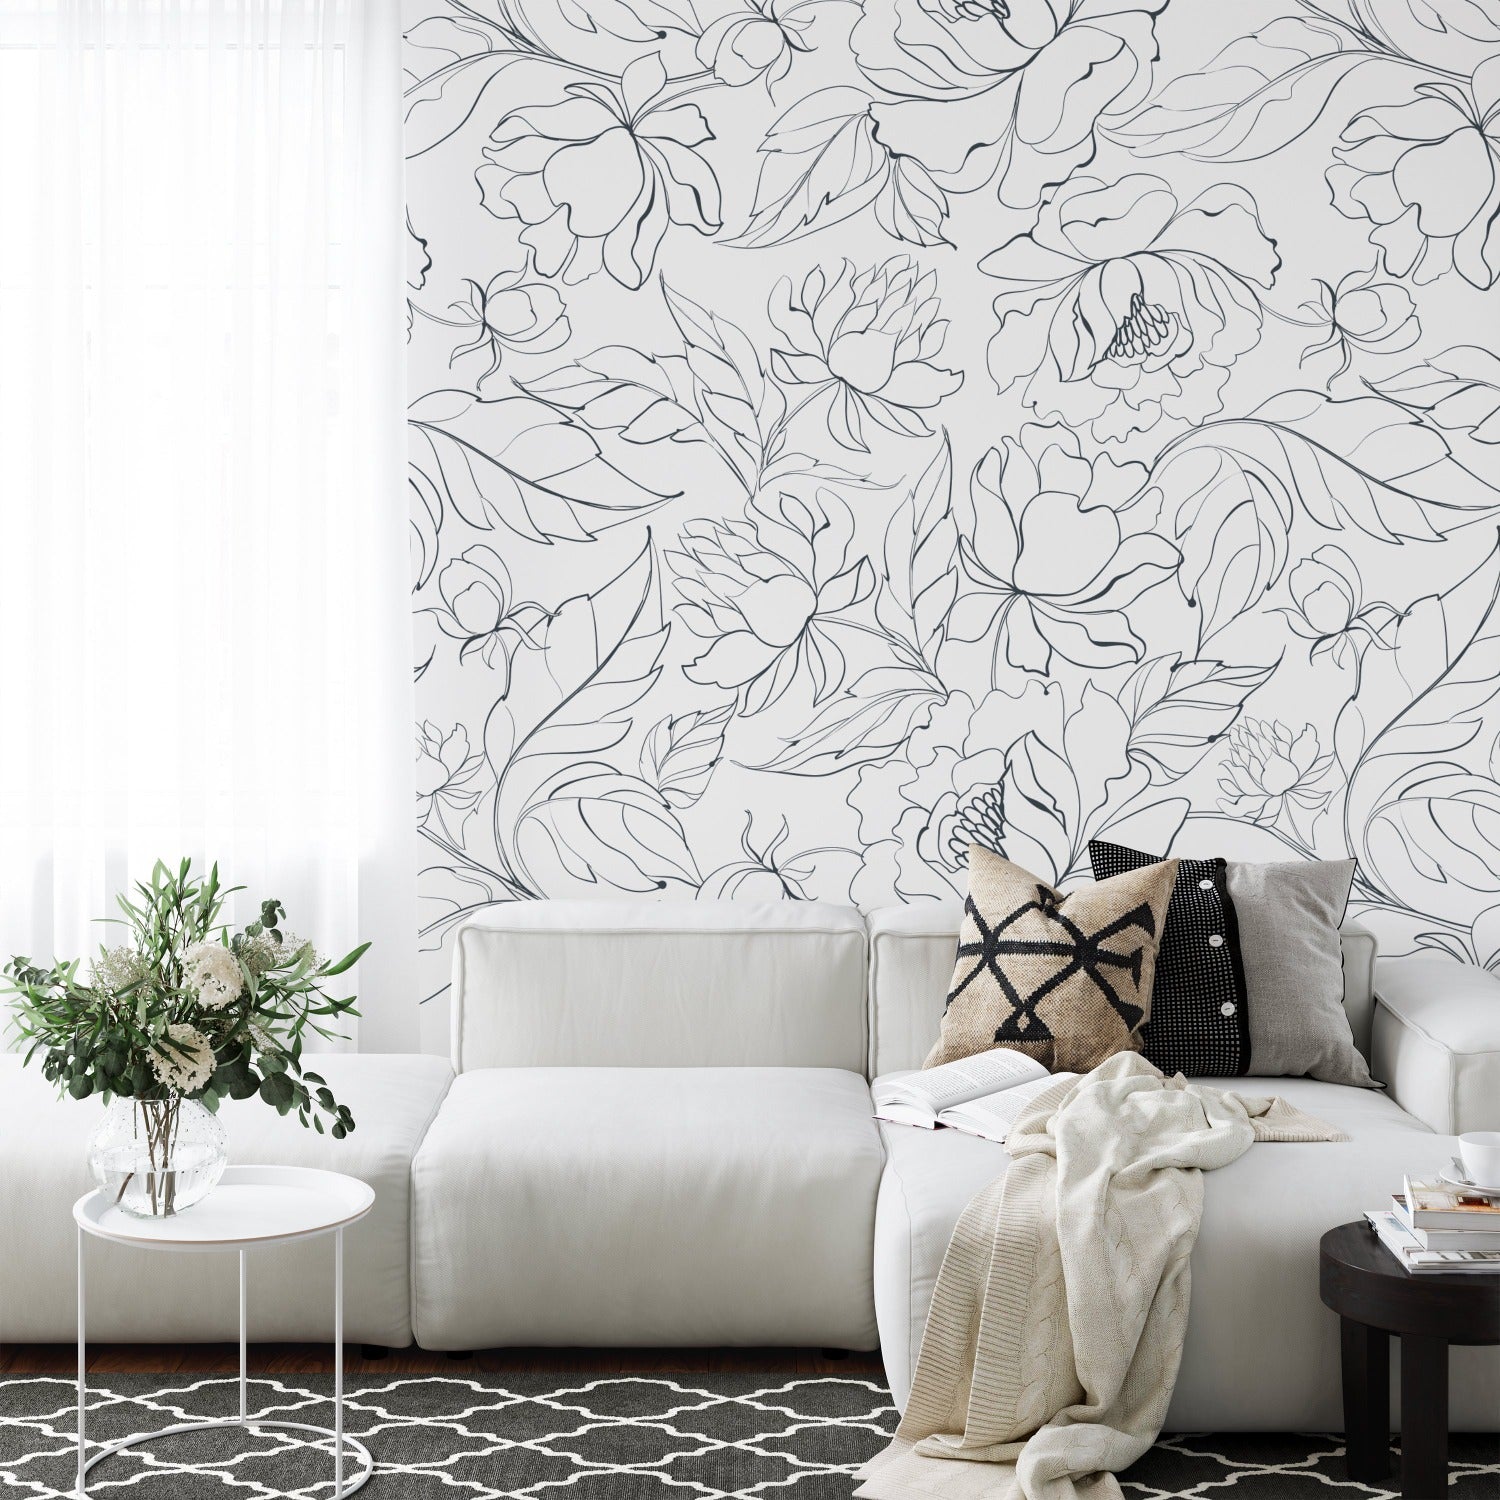 An unrolled roll of modern black floral wallpaper on a white background, presenting a monochrome floral design with prominent lines depicting a variety of flowers and leaves.